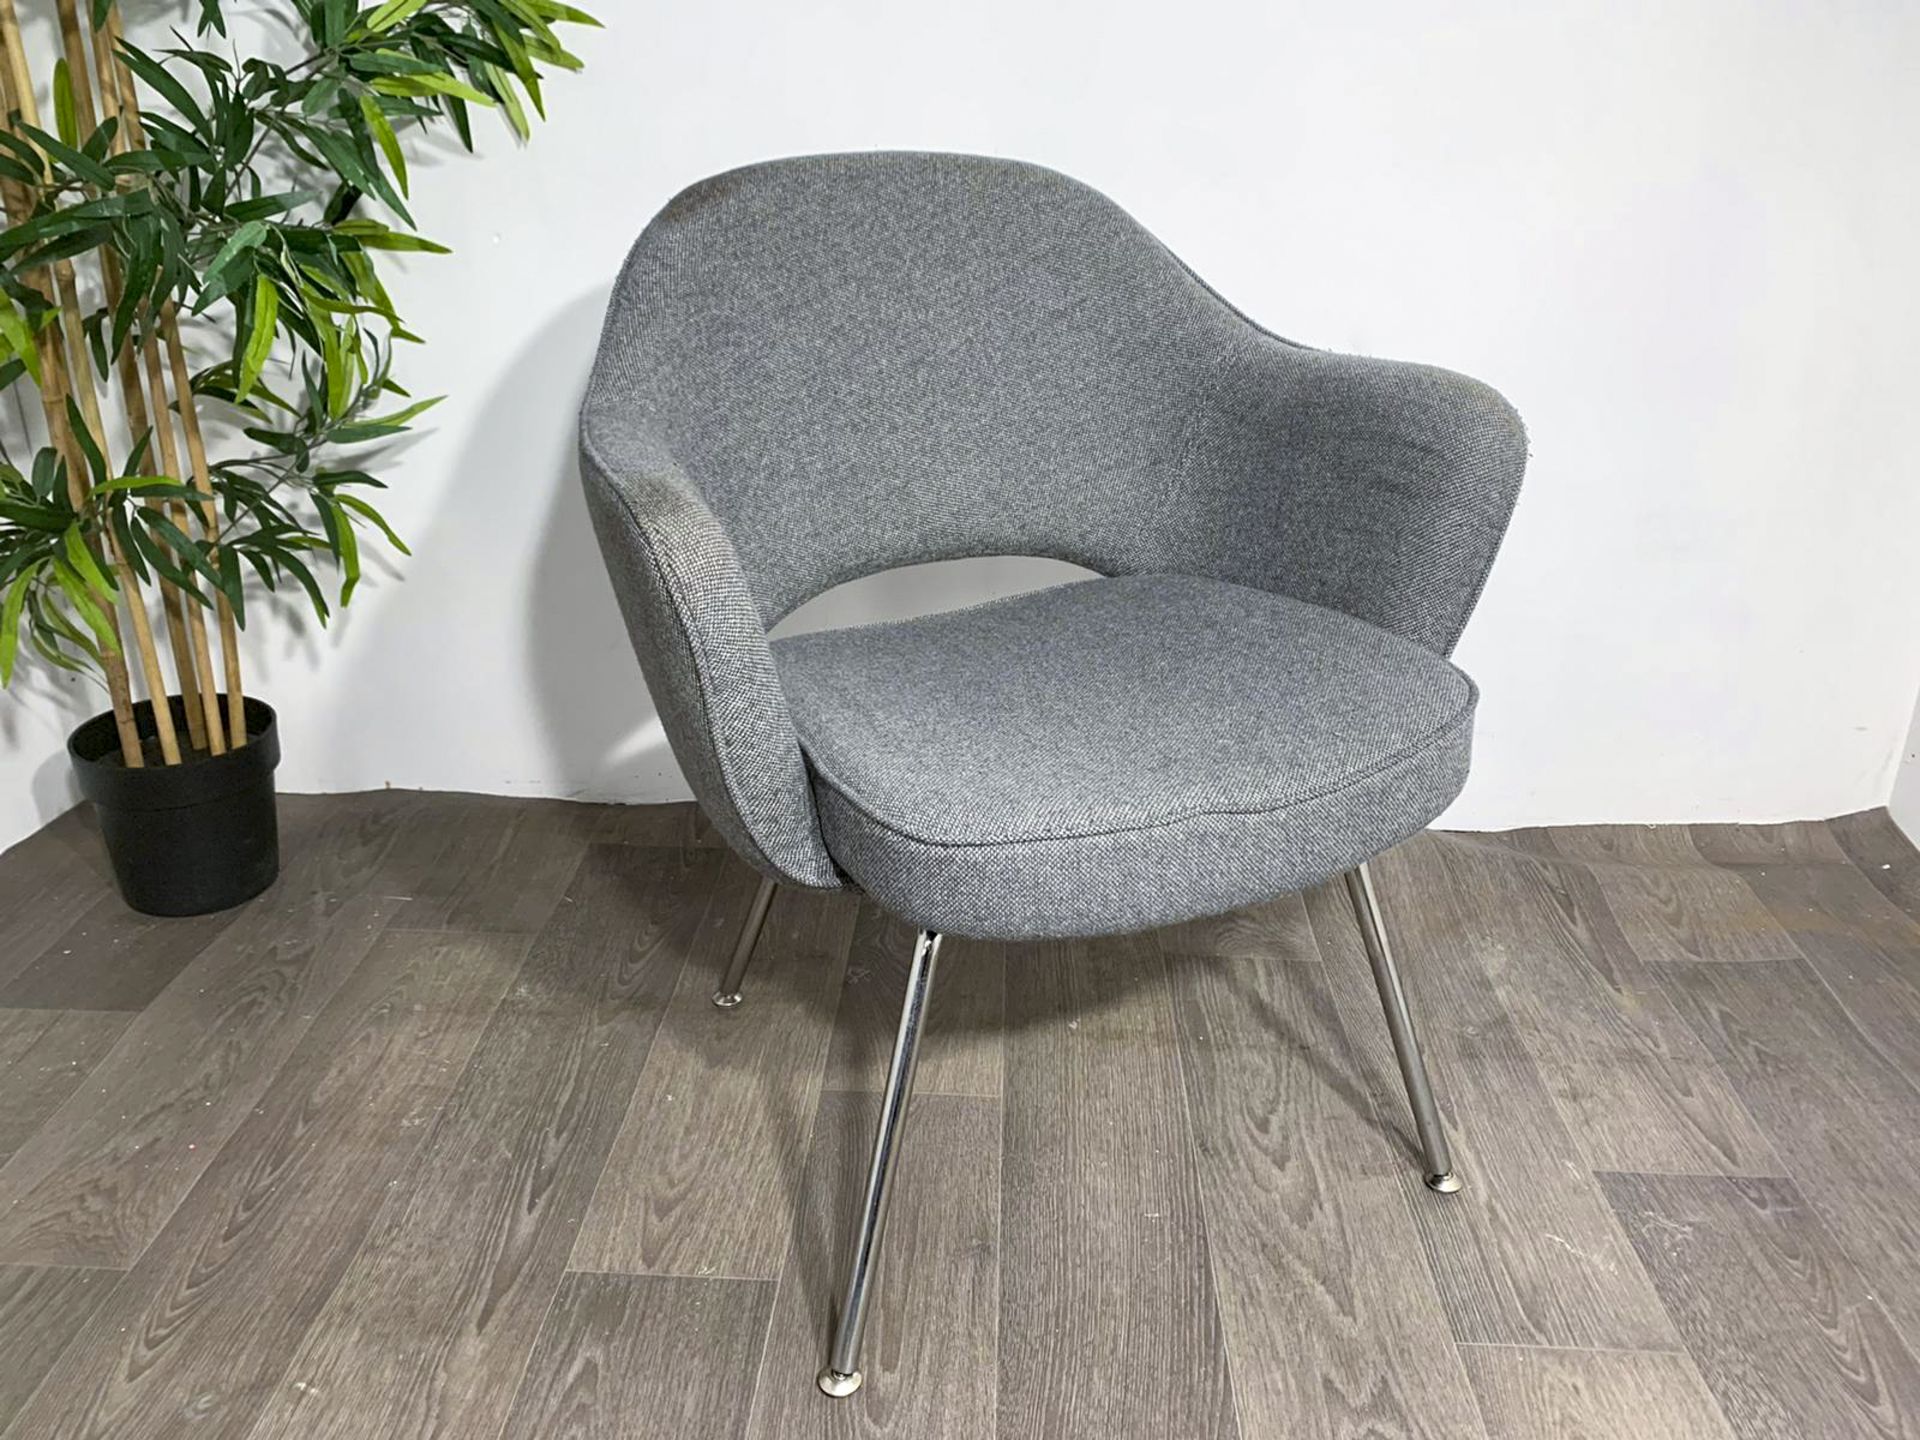 Grey Fabric Commercial Grade Chair with Chrome Legs x2 - Image 5 of 9